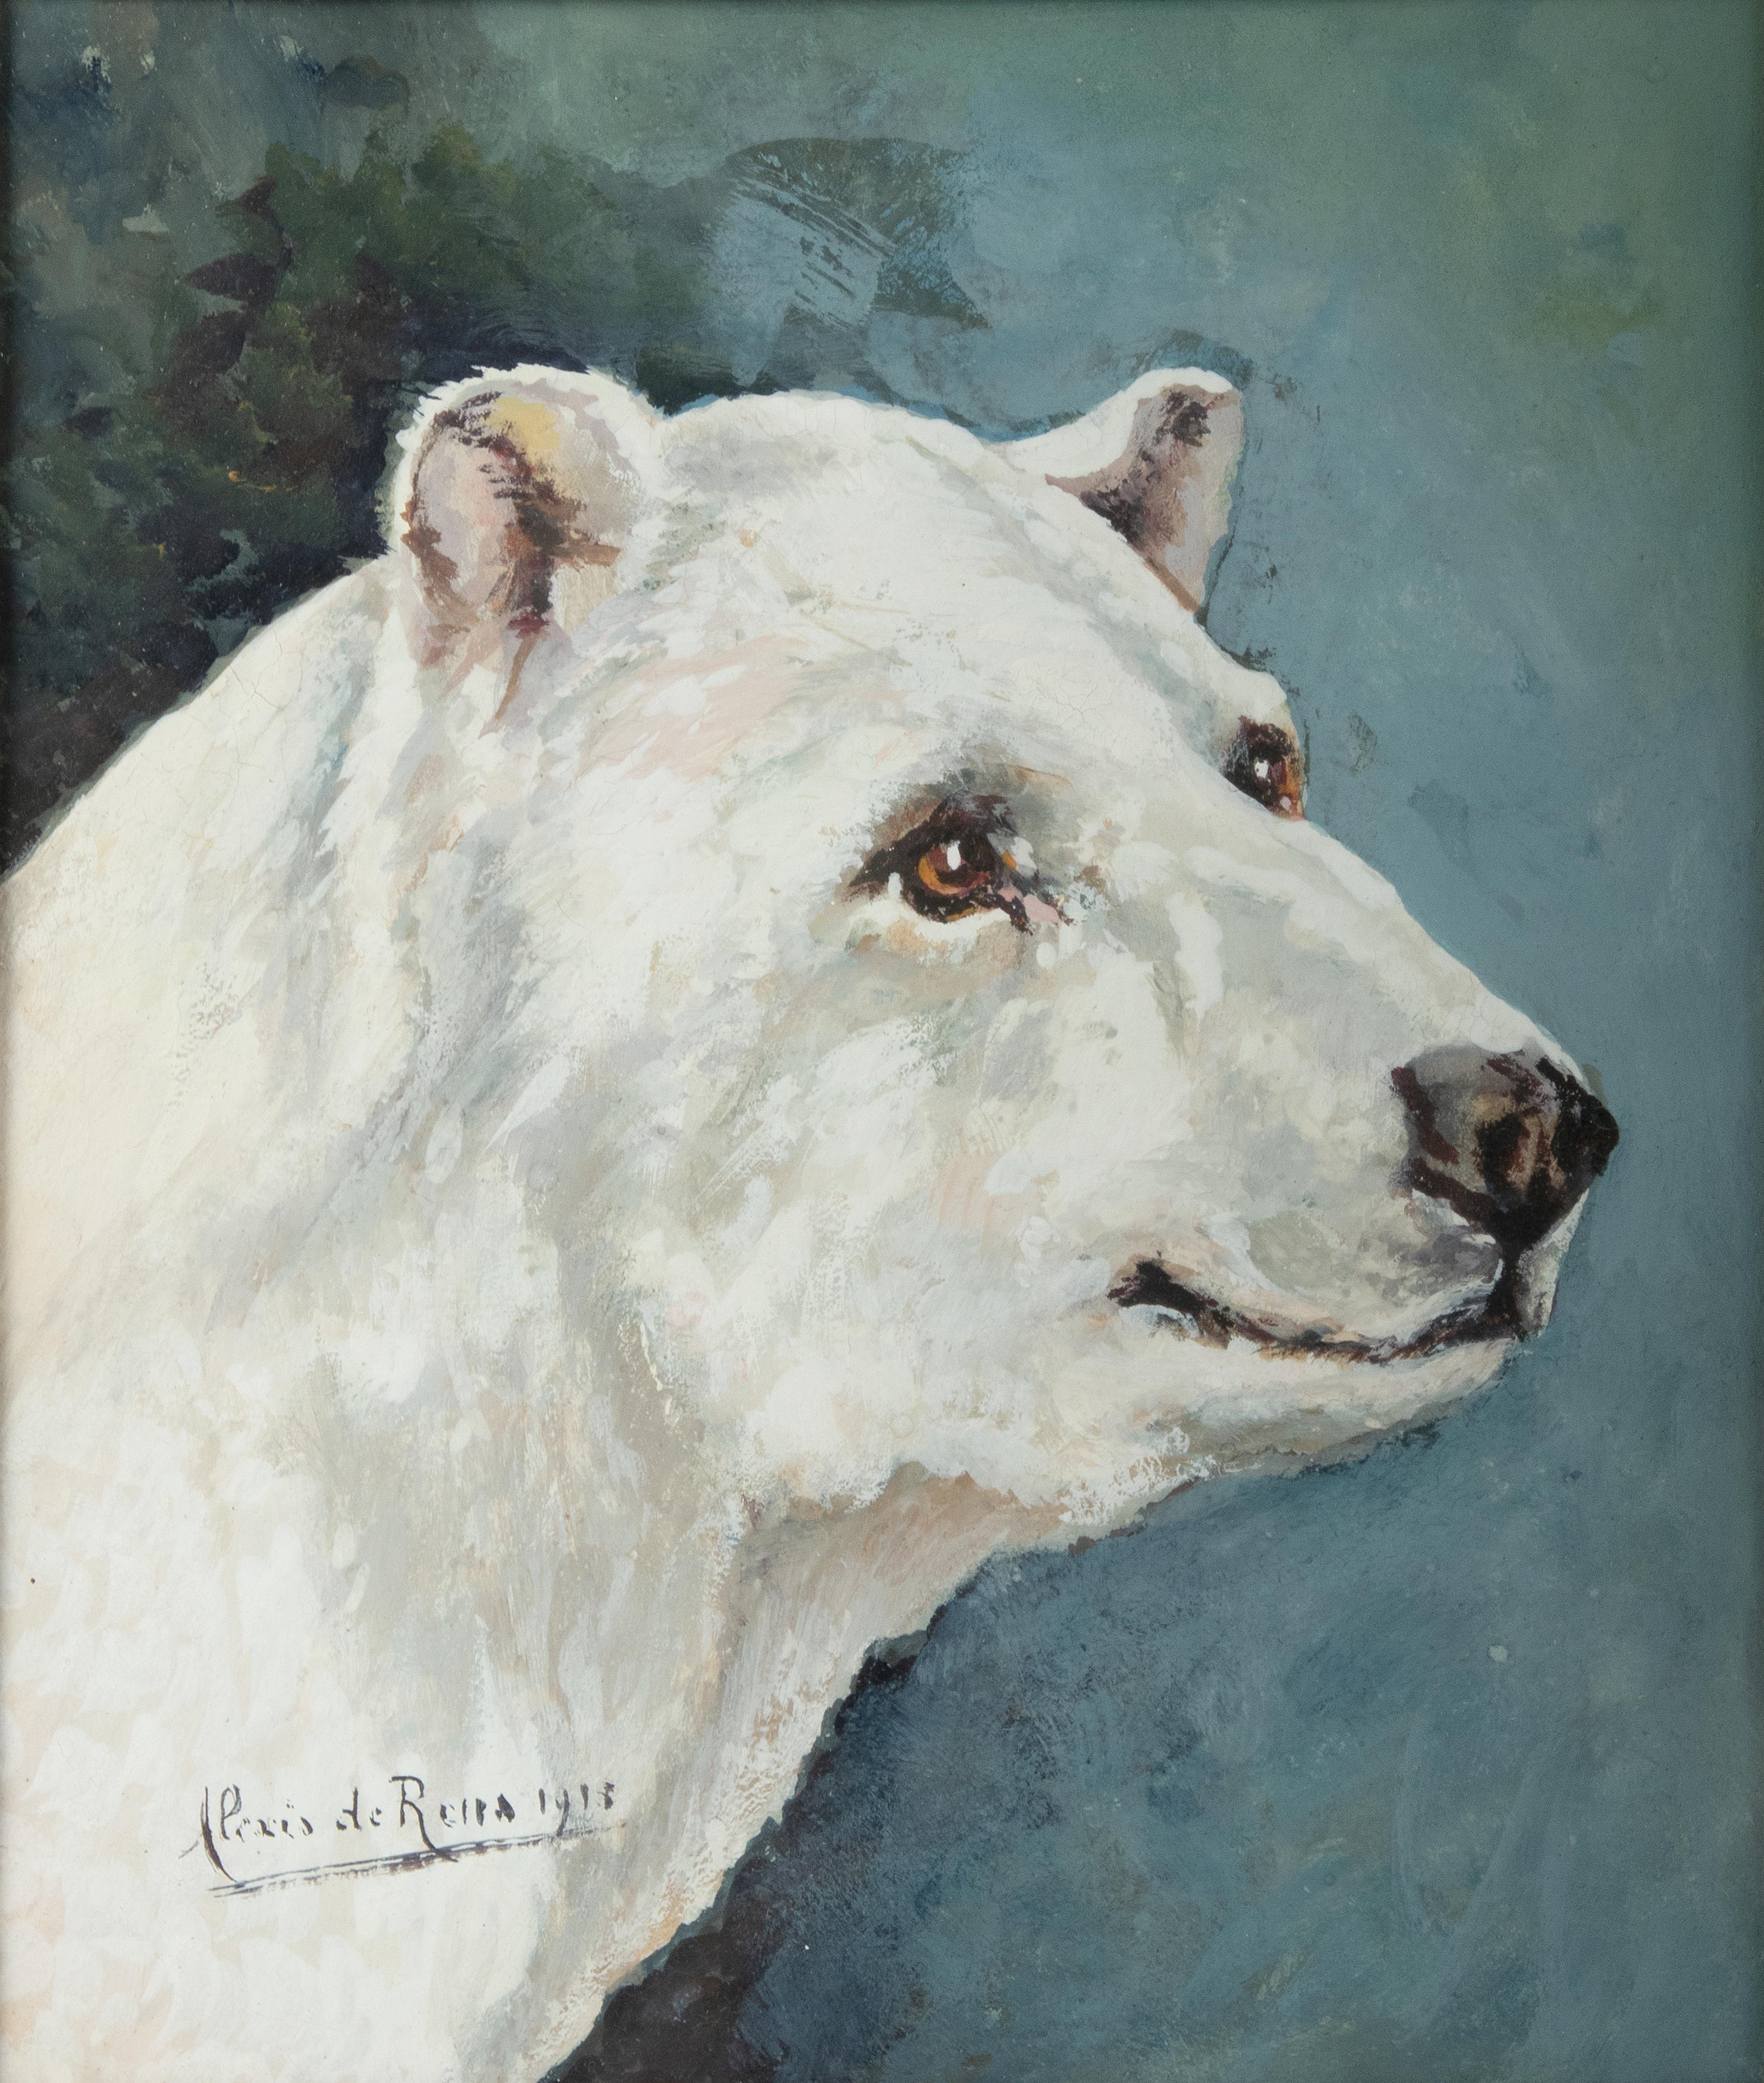 Beautiful painting, portrait of a polar bear, by the Belgian artist Alexis de Reus. She was active in the early 1900s and mainly painted animals. The painting is clearly signed and dated, lower right, 1913. This painting gives a nice picture of the